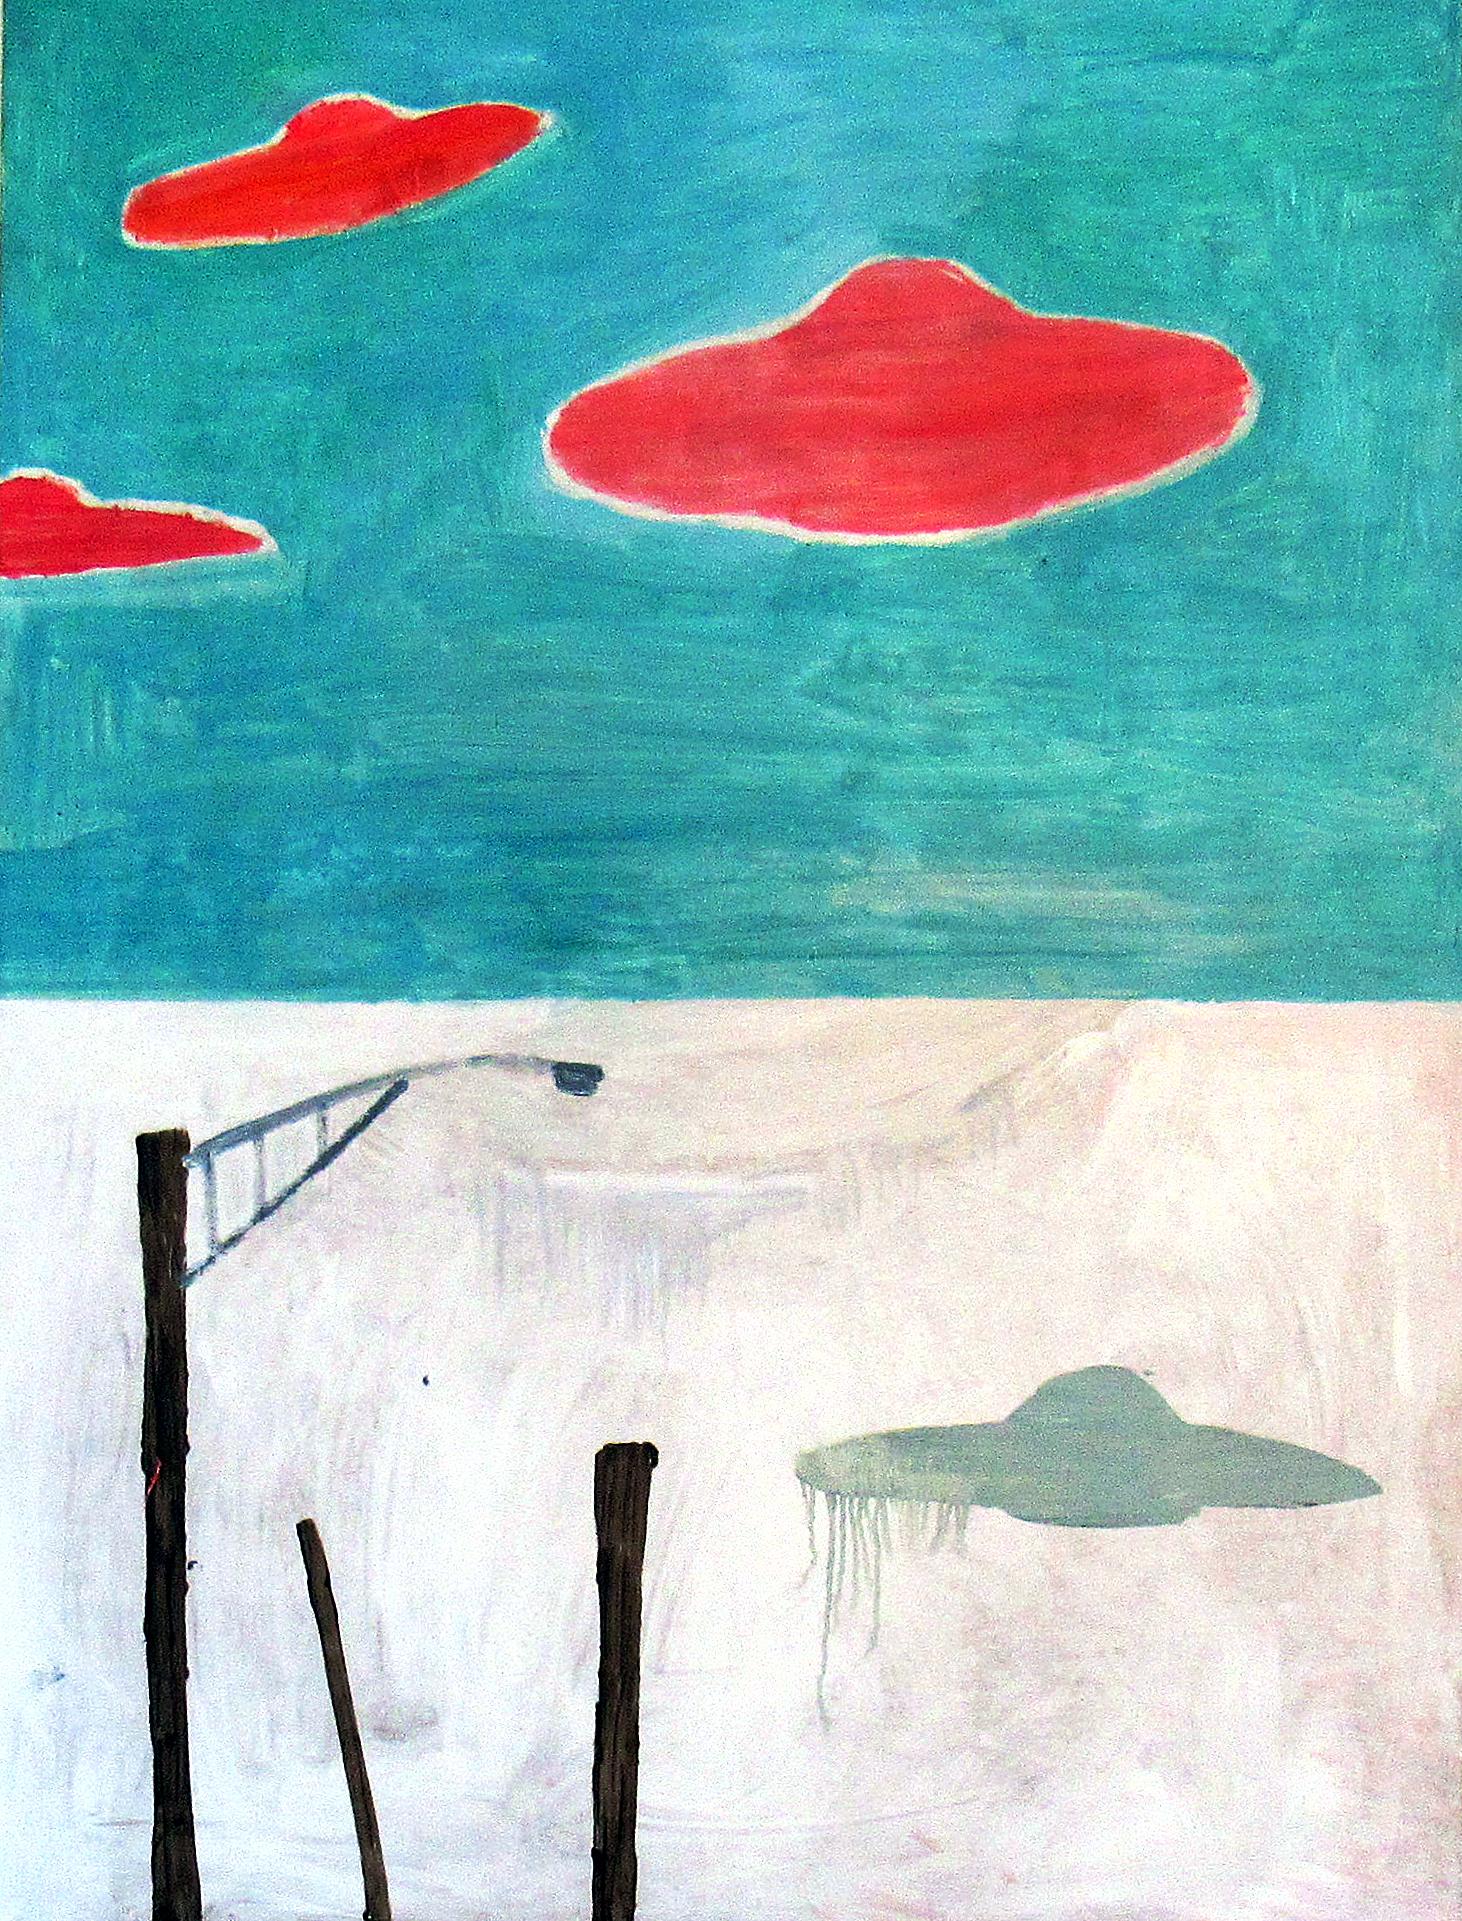 C. Dimitri Landscape Painting - Landscape, colorful happy abstracted red flying saucers against turquoise sky